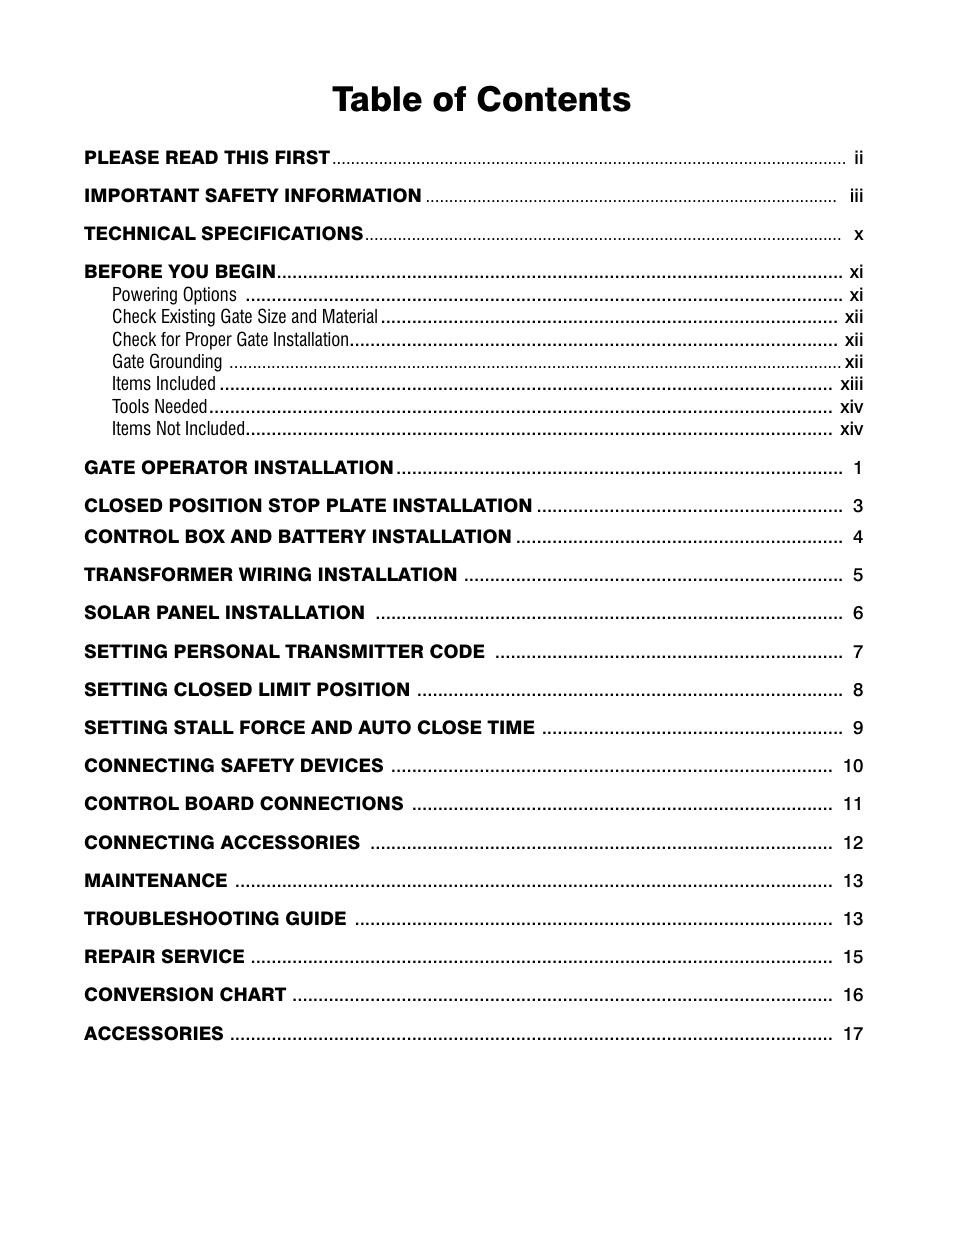 Mighty Mule FM200 User Manual | Page 3 / 36